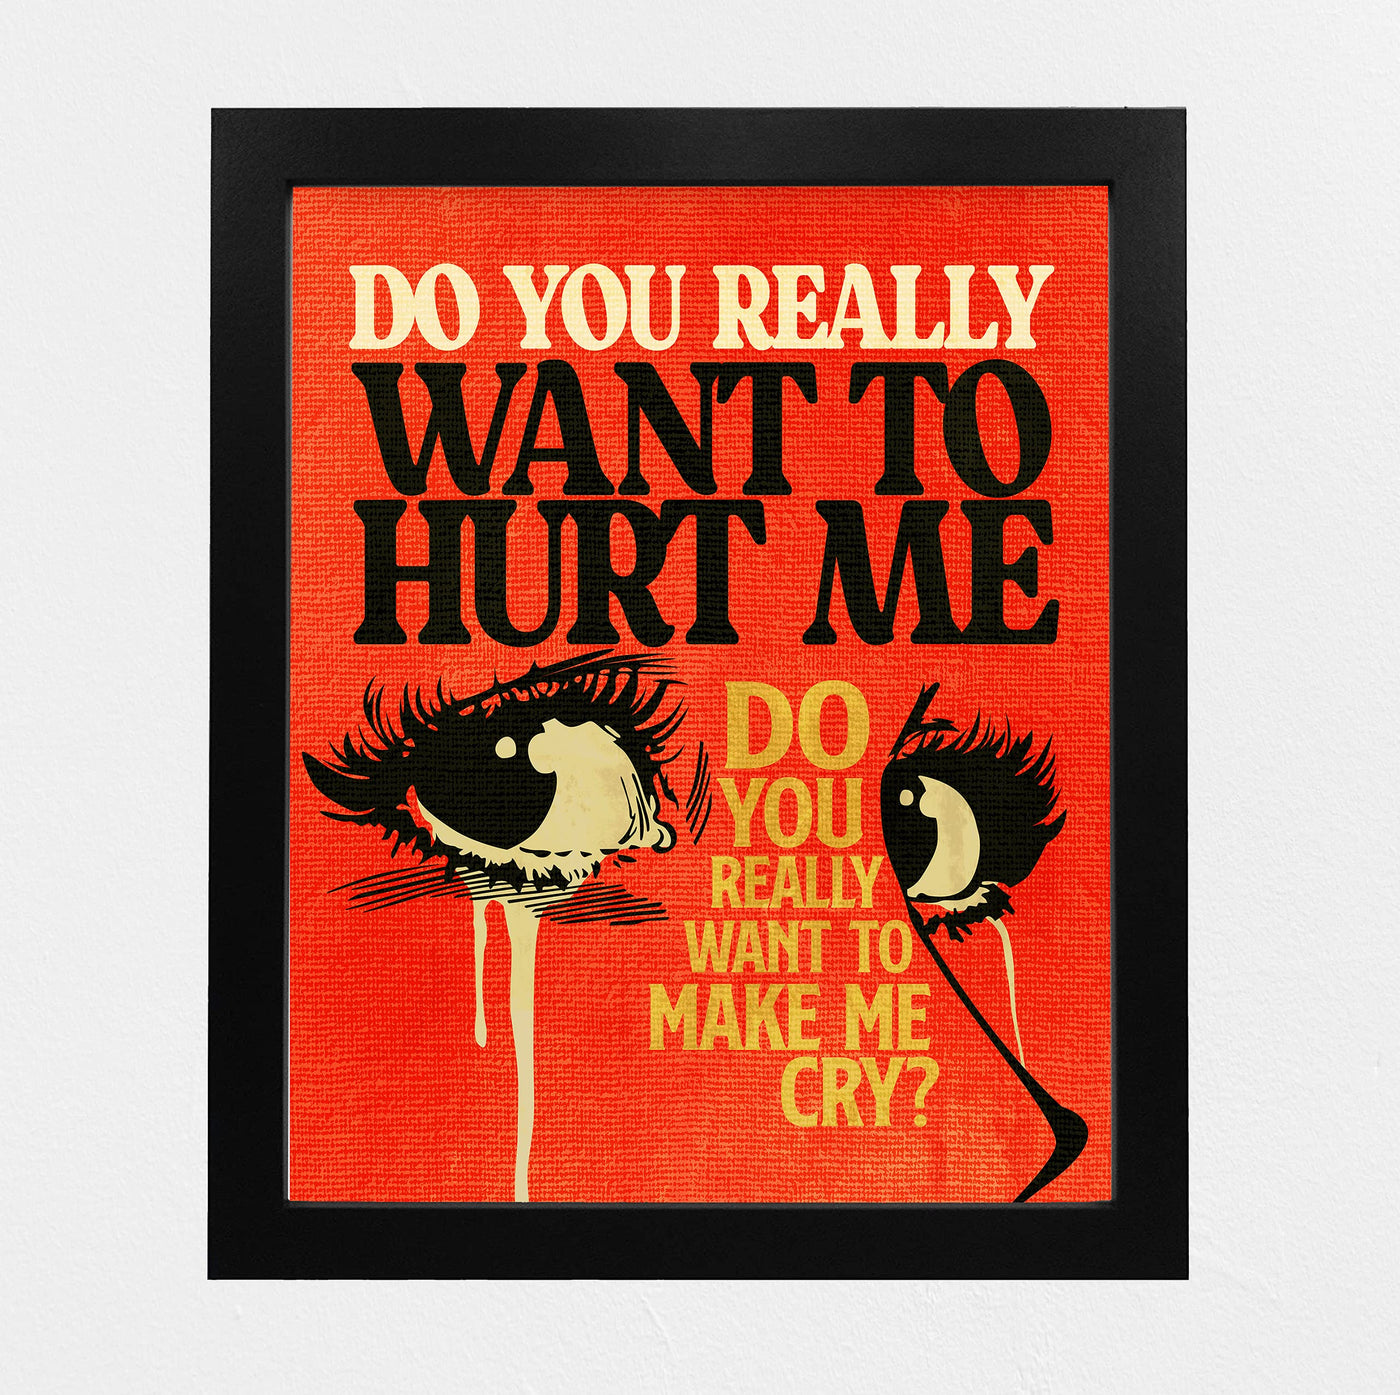 Do You Really Want To Hurt Me-Song Lyrics Wall Art -8 x 10" Typographic Word Art Print-Ready to Frame. Retro Home-Office-Studio Decor. Perfect Gift for Culture Club Band & All Pop-Rock Music Fans!